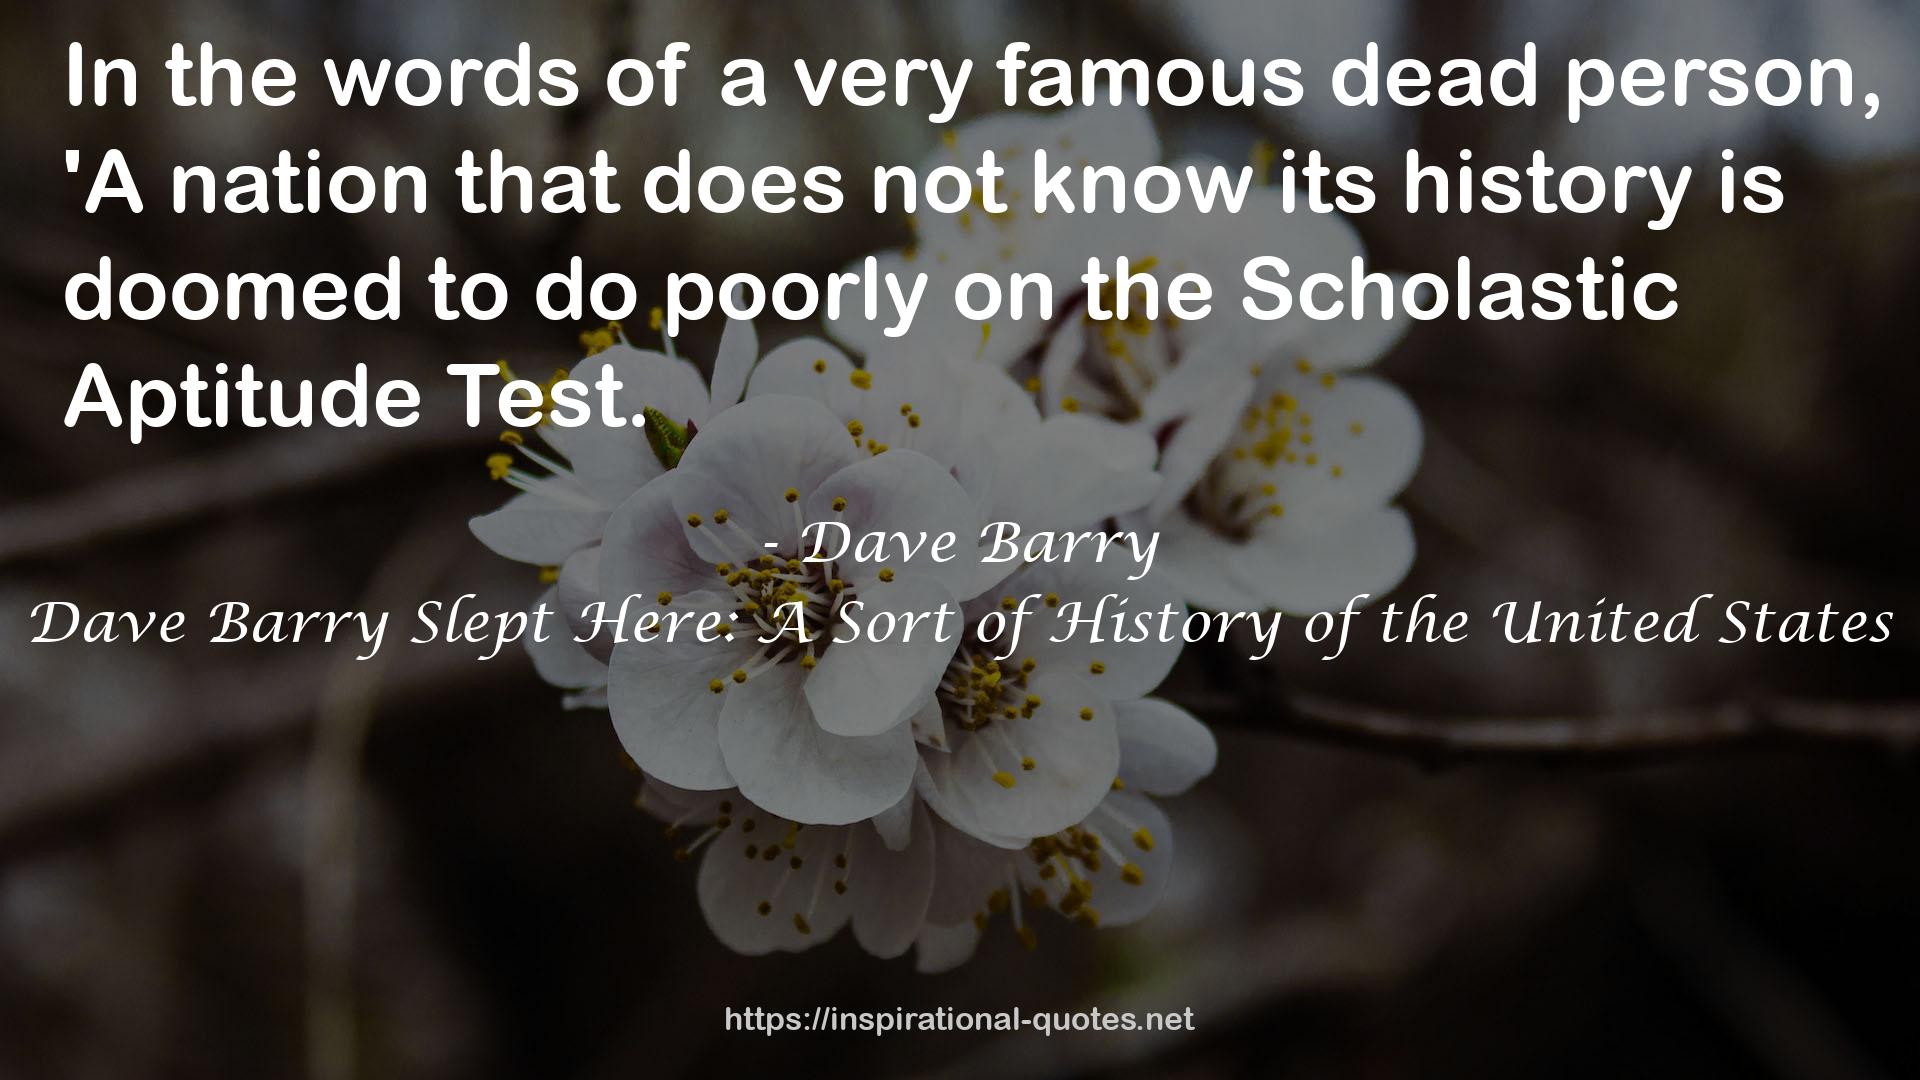 Dave Barry Slept Here: A Sort of History of the United States QUOTES